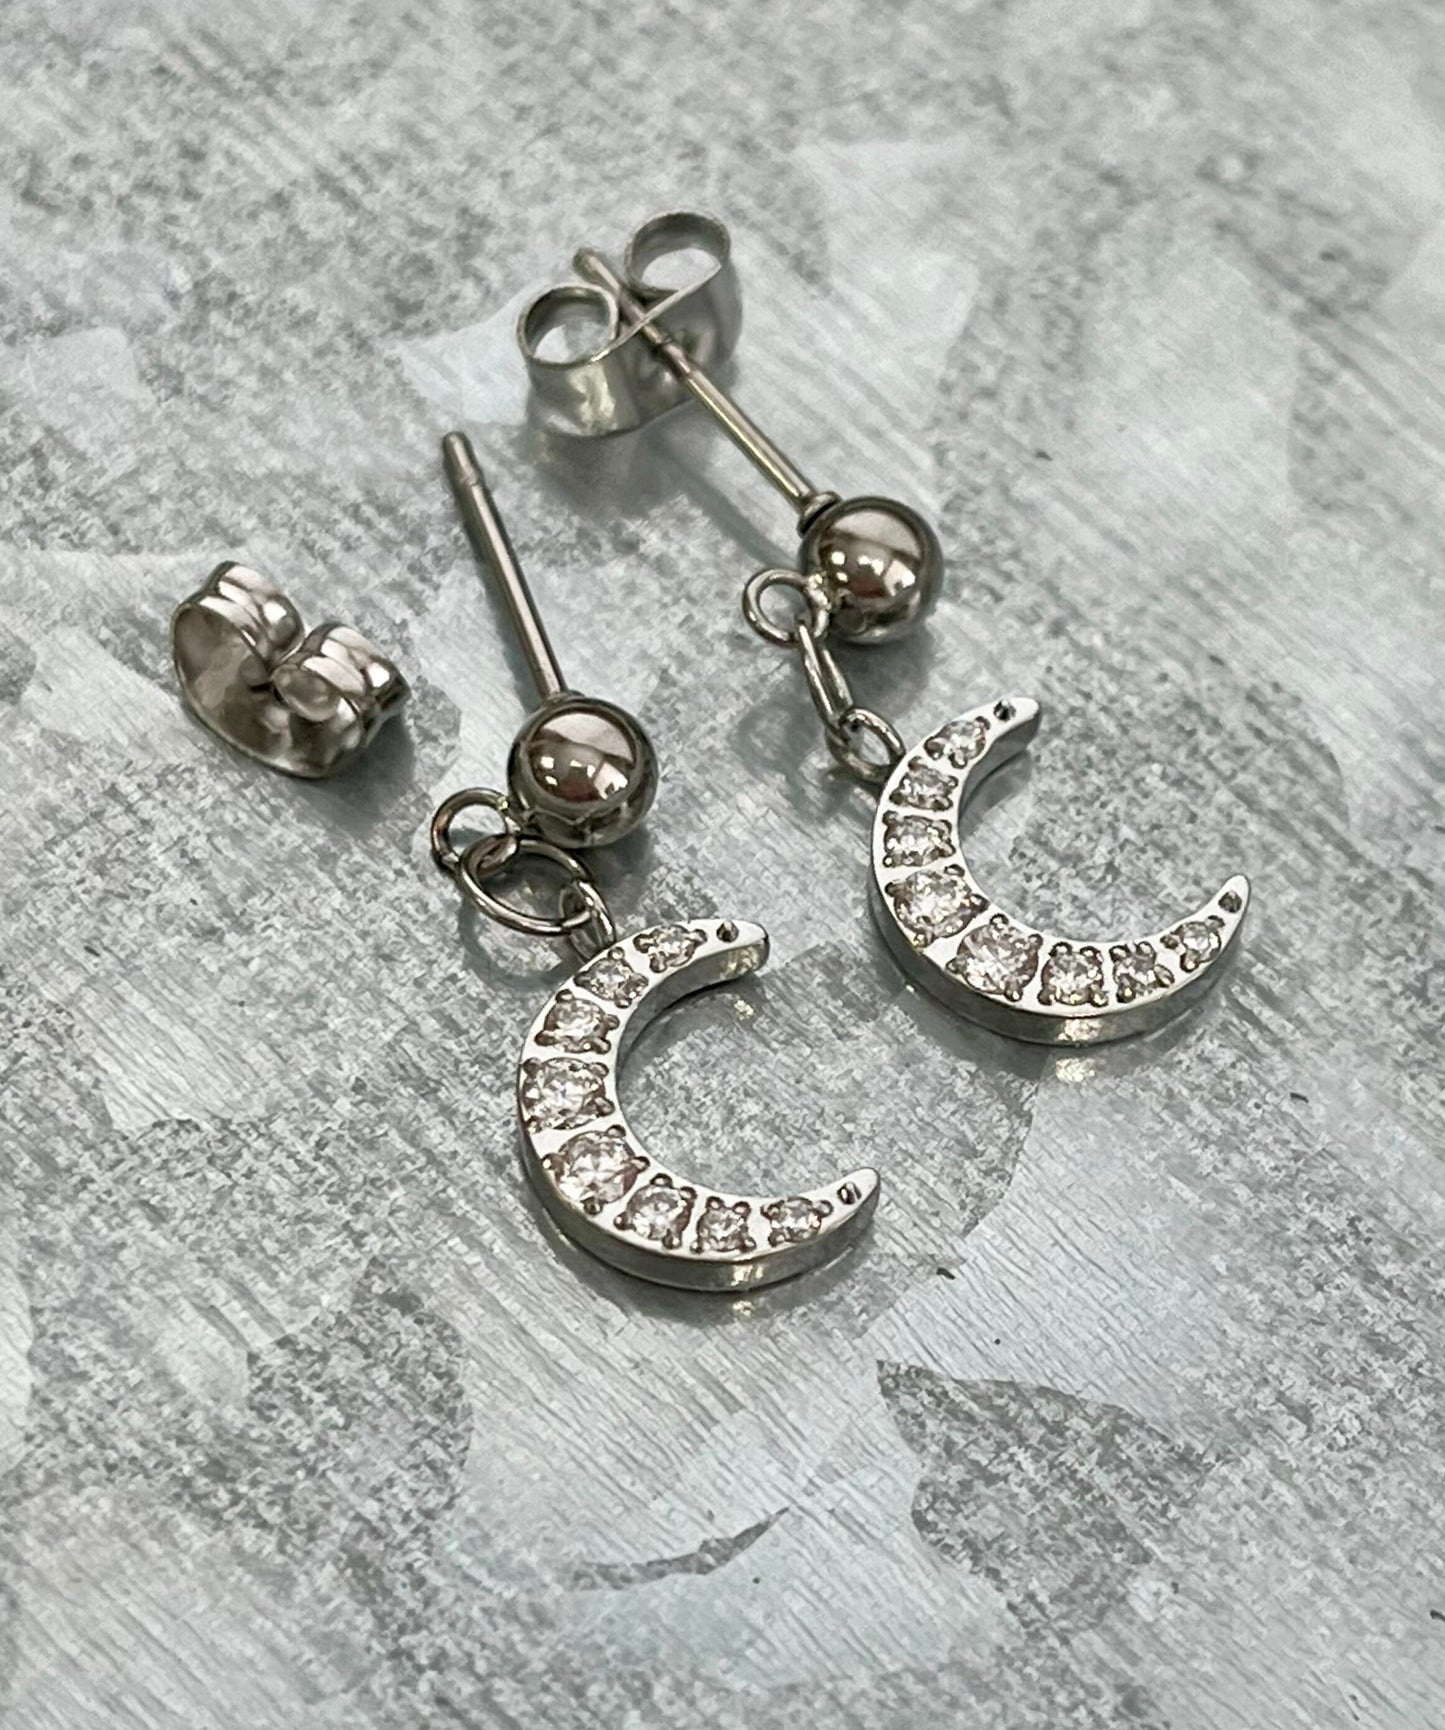 Pair of Stunning CZ Gem Crescent Moon Dangles 316L Stainless Steel Ball Stud Earrings - Gauges 20g - Gold, Rose Gold and Silver Available!